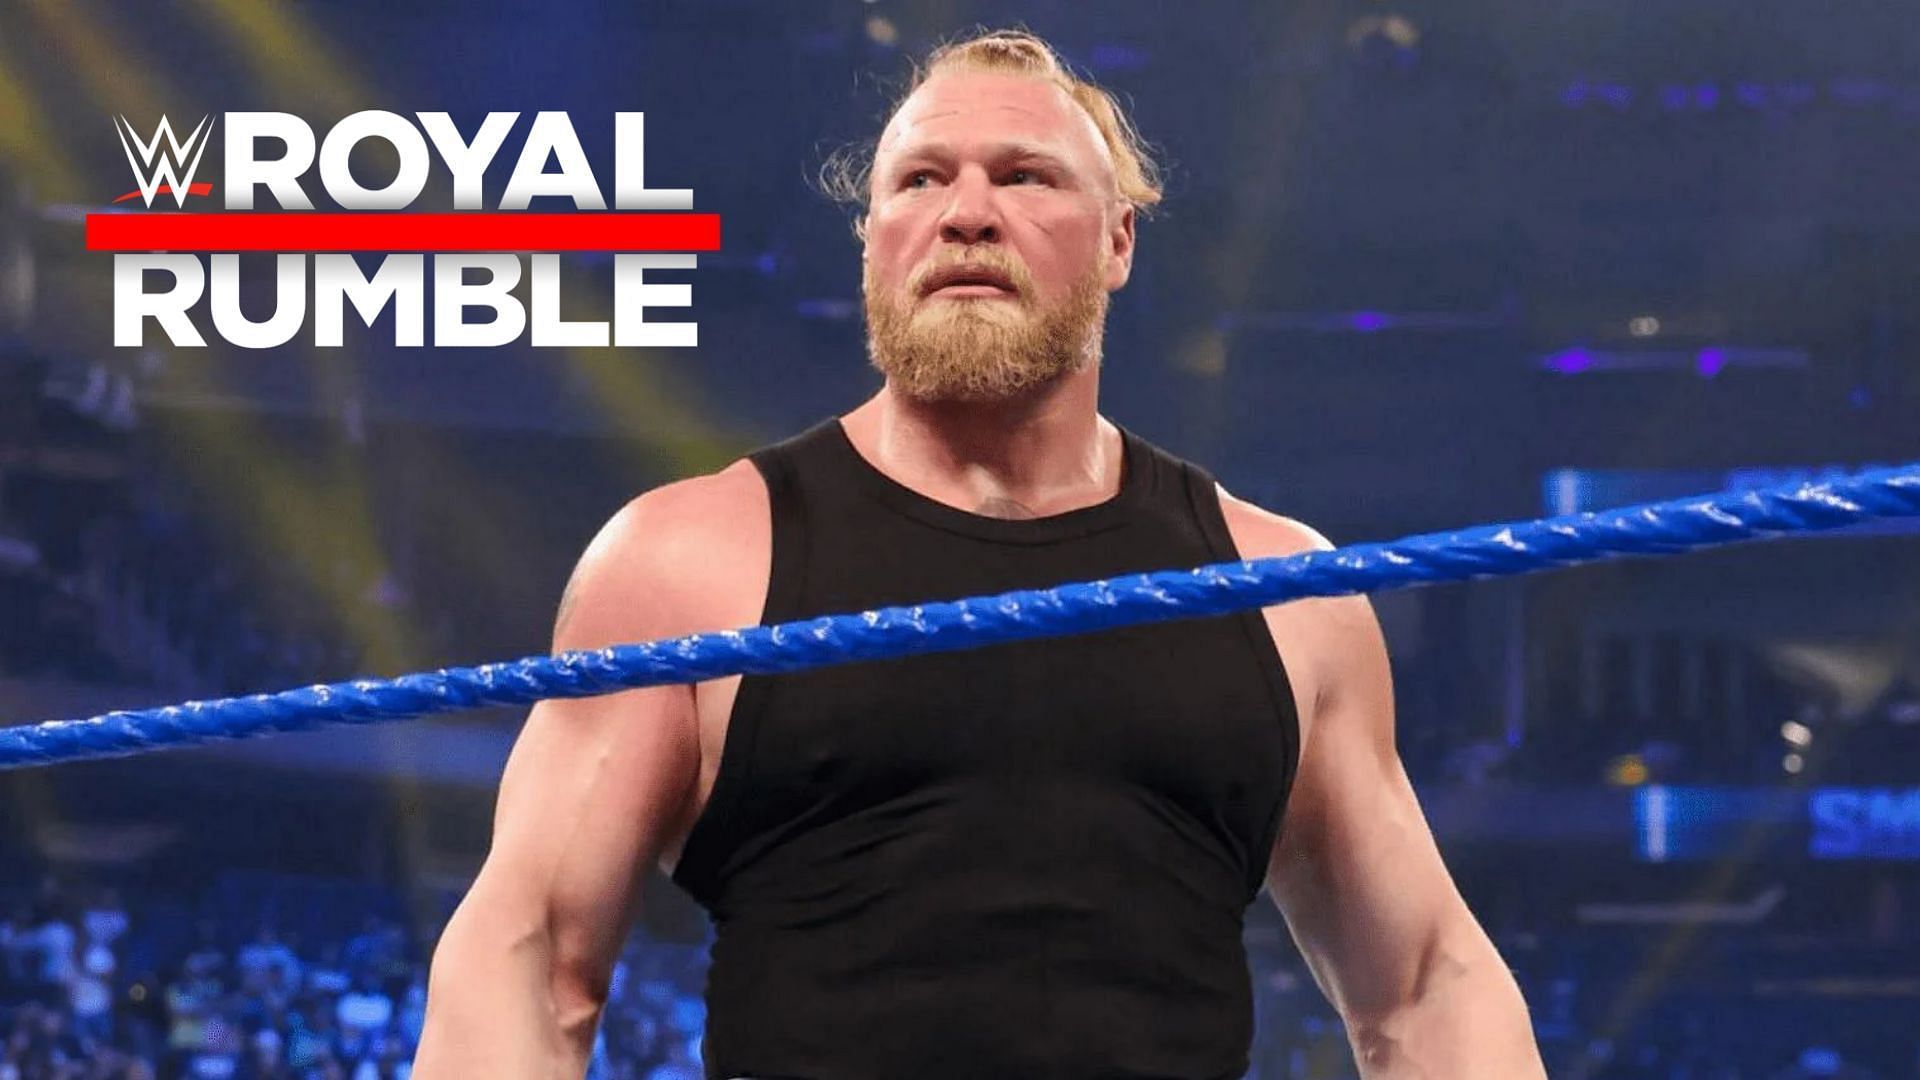 Brock Lesnar has some interesting challenges ahead of Royal Rumble 2023